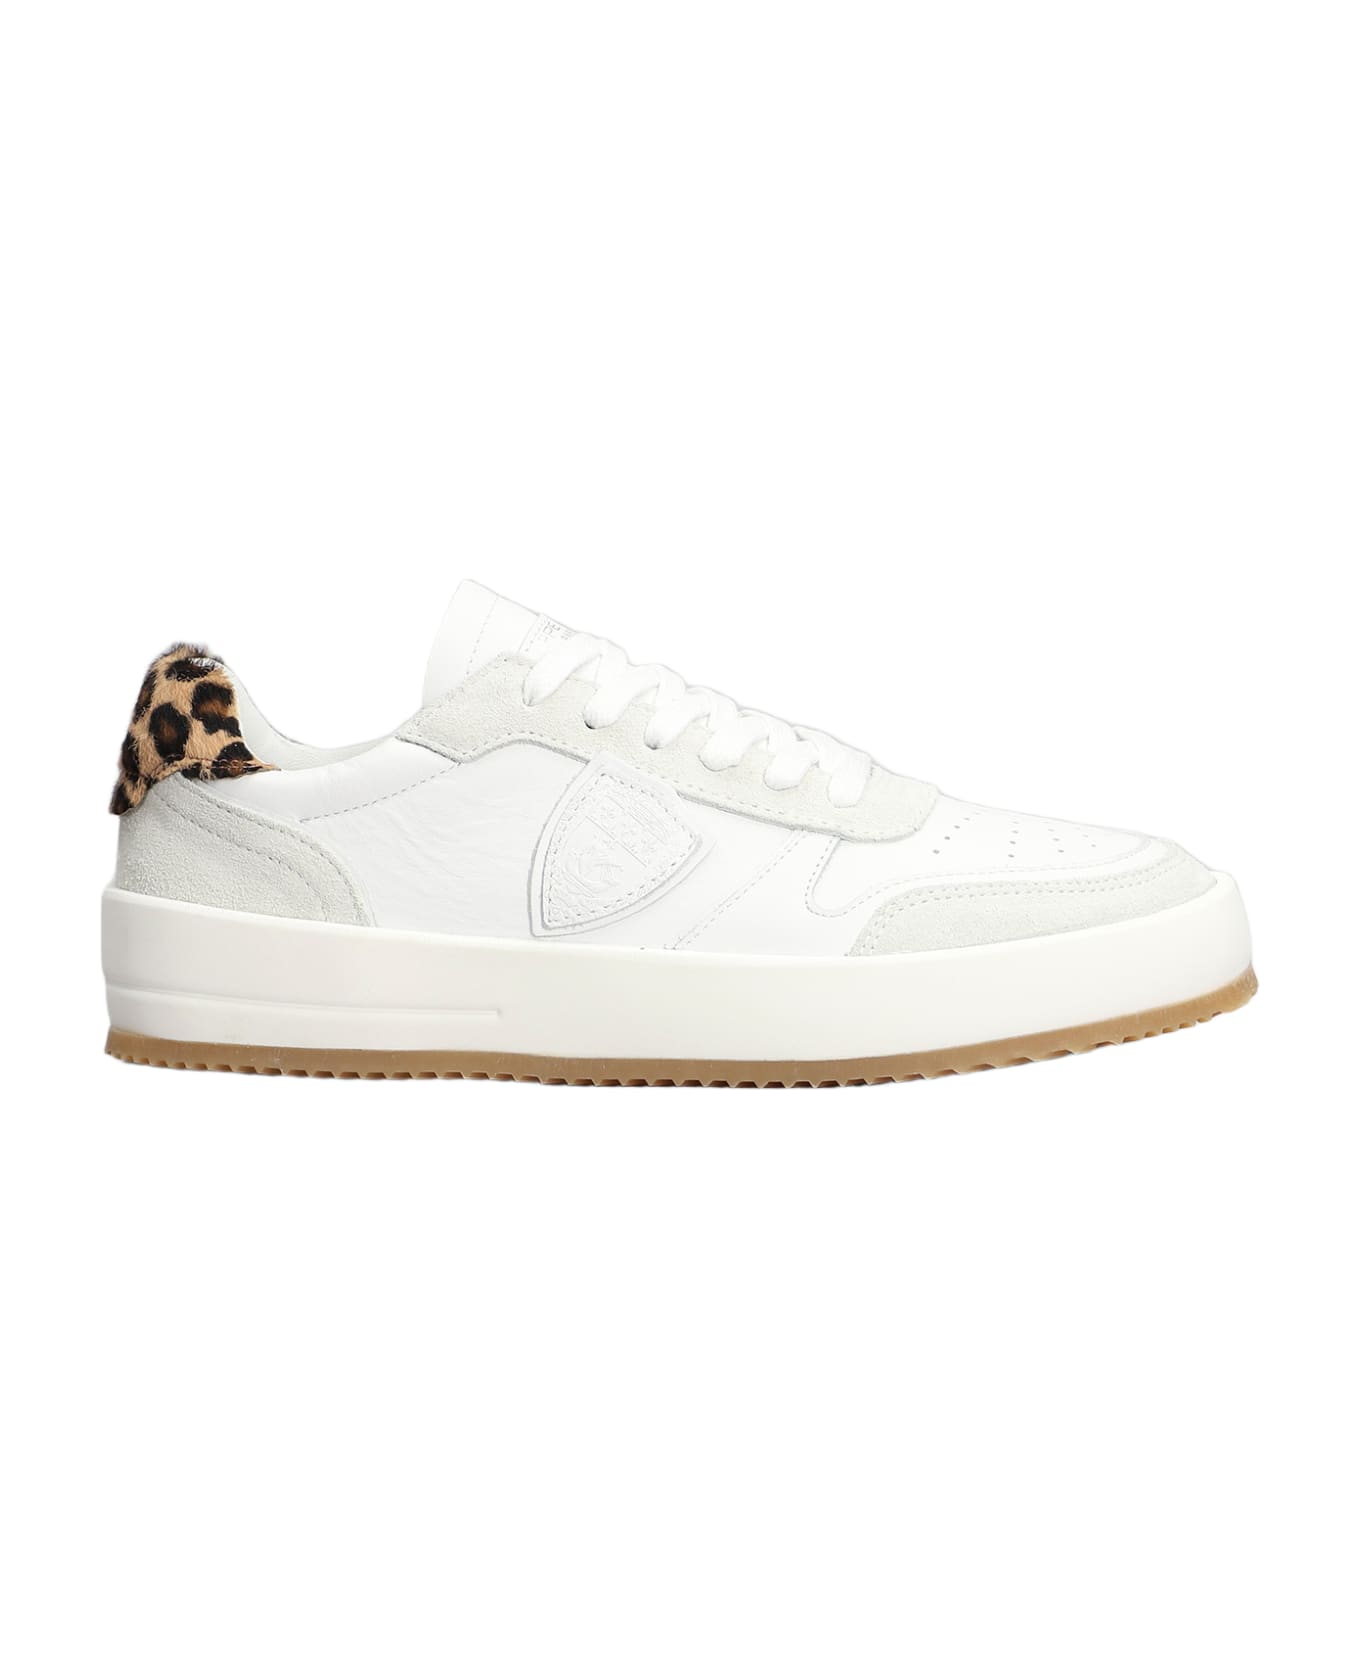 Philippe Model Nice Low Sneakers In White Suede And Leather - white